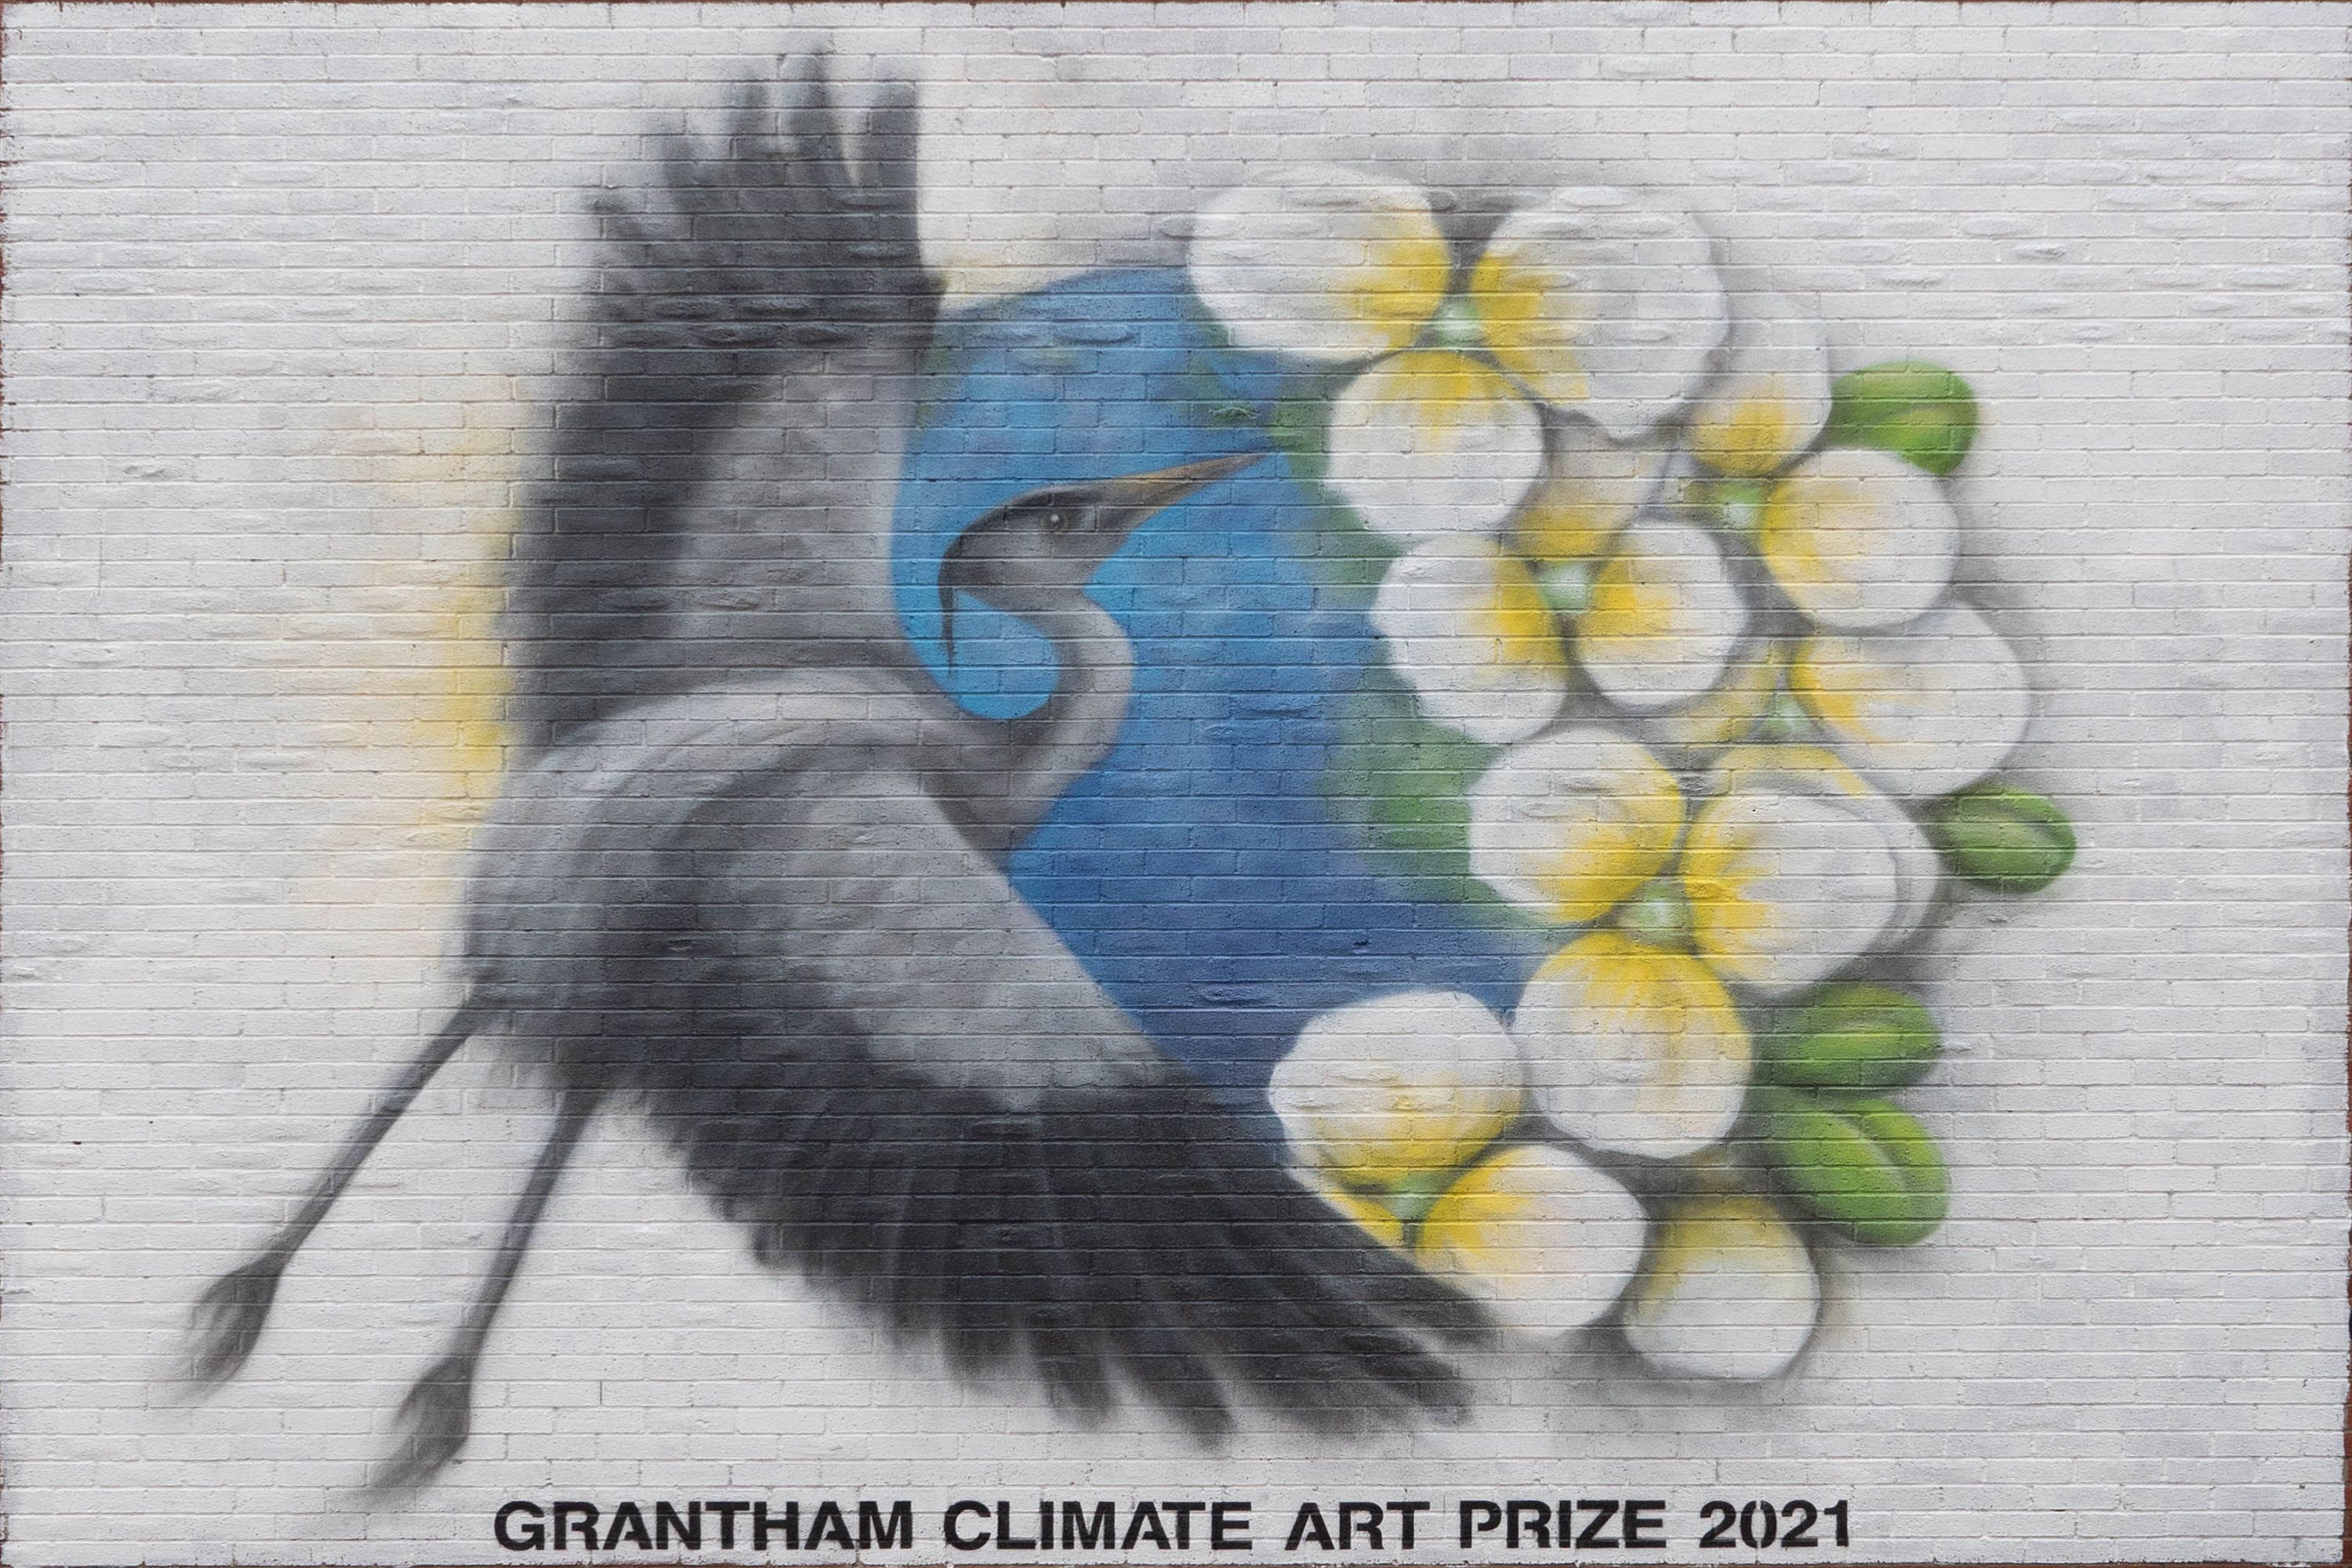 A mural of a bird and some flowers, with Grantham Climate Art Prize 2021 written underneath